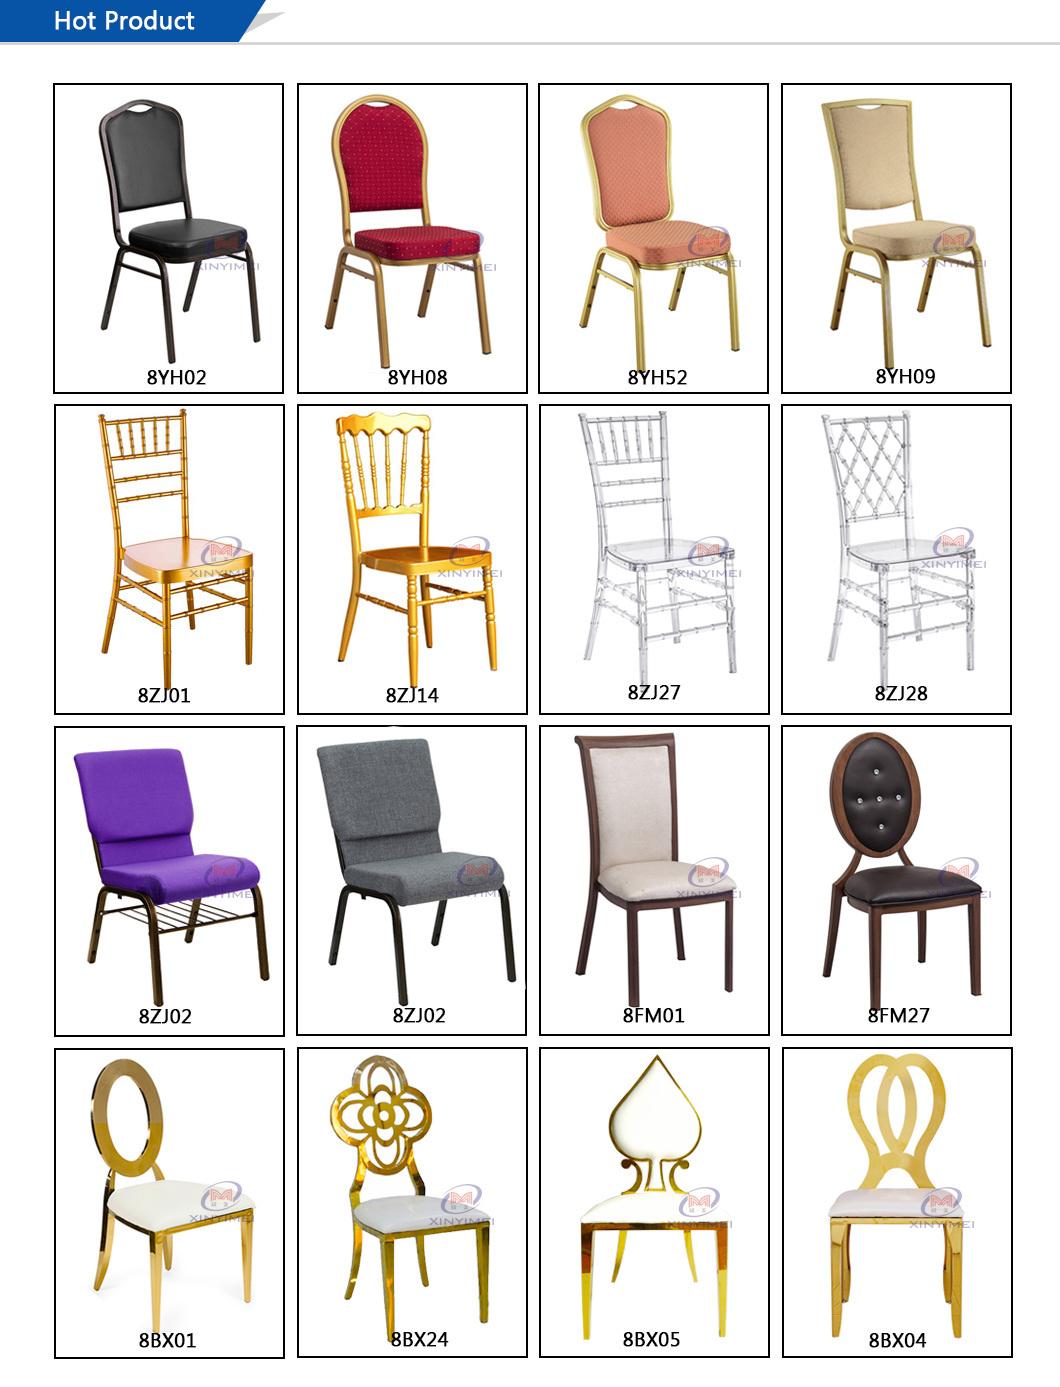 Morden Quality Guarantee Plastic Dining Chair Transaprent Acrylic Folding Chair with Metal Frame